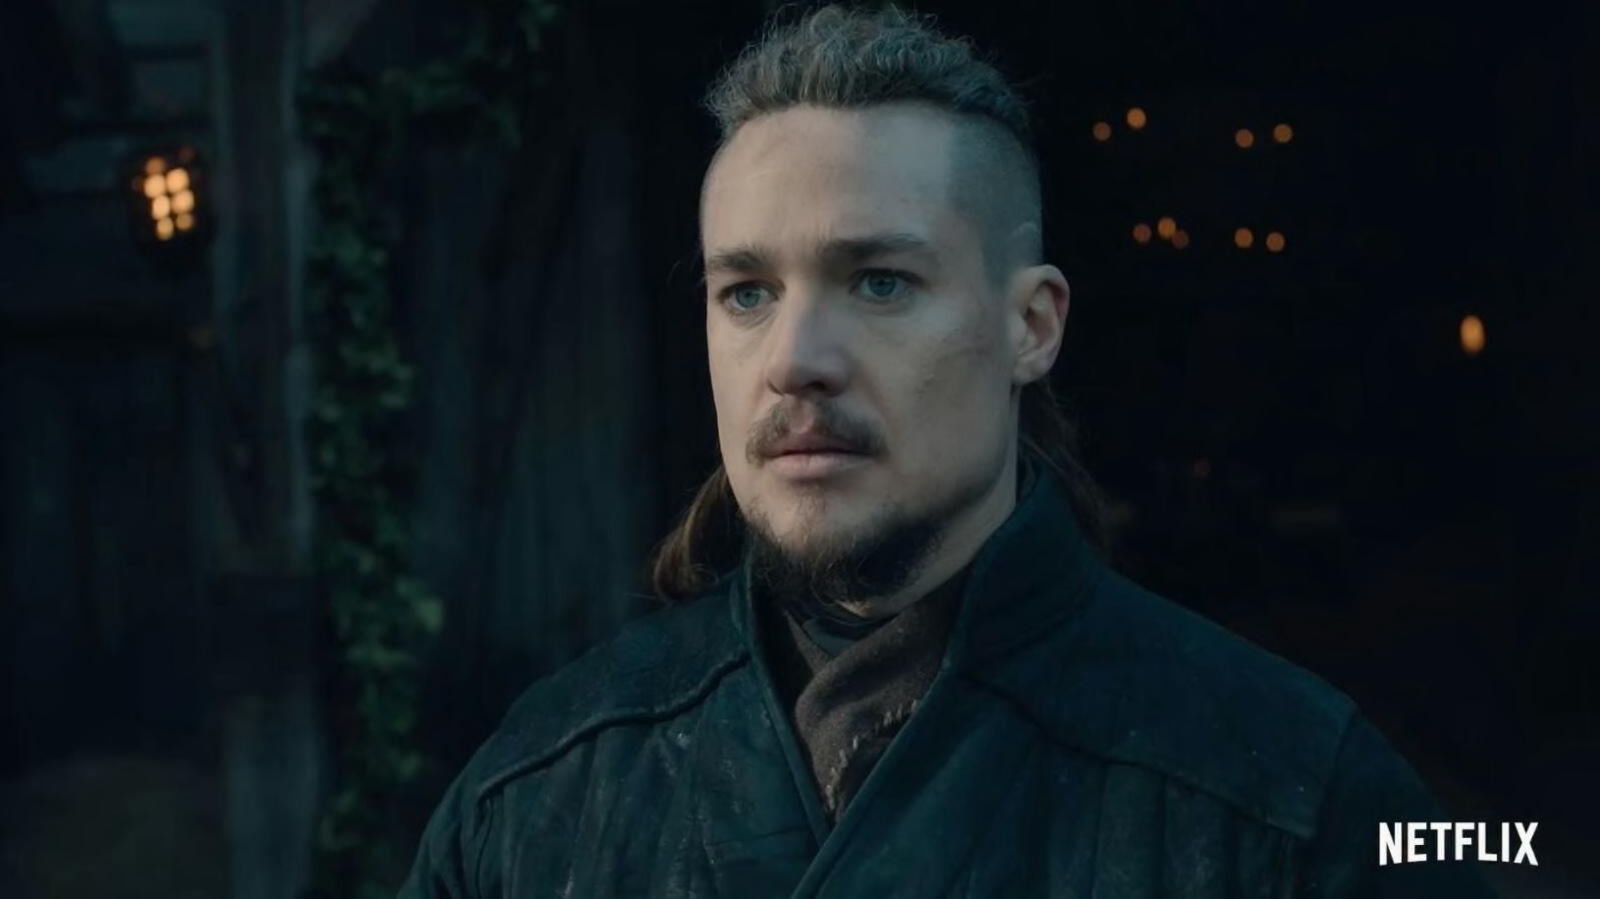 Uhtred the Bold, ealdorman of Northumbria